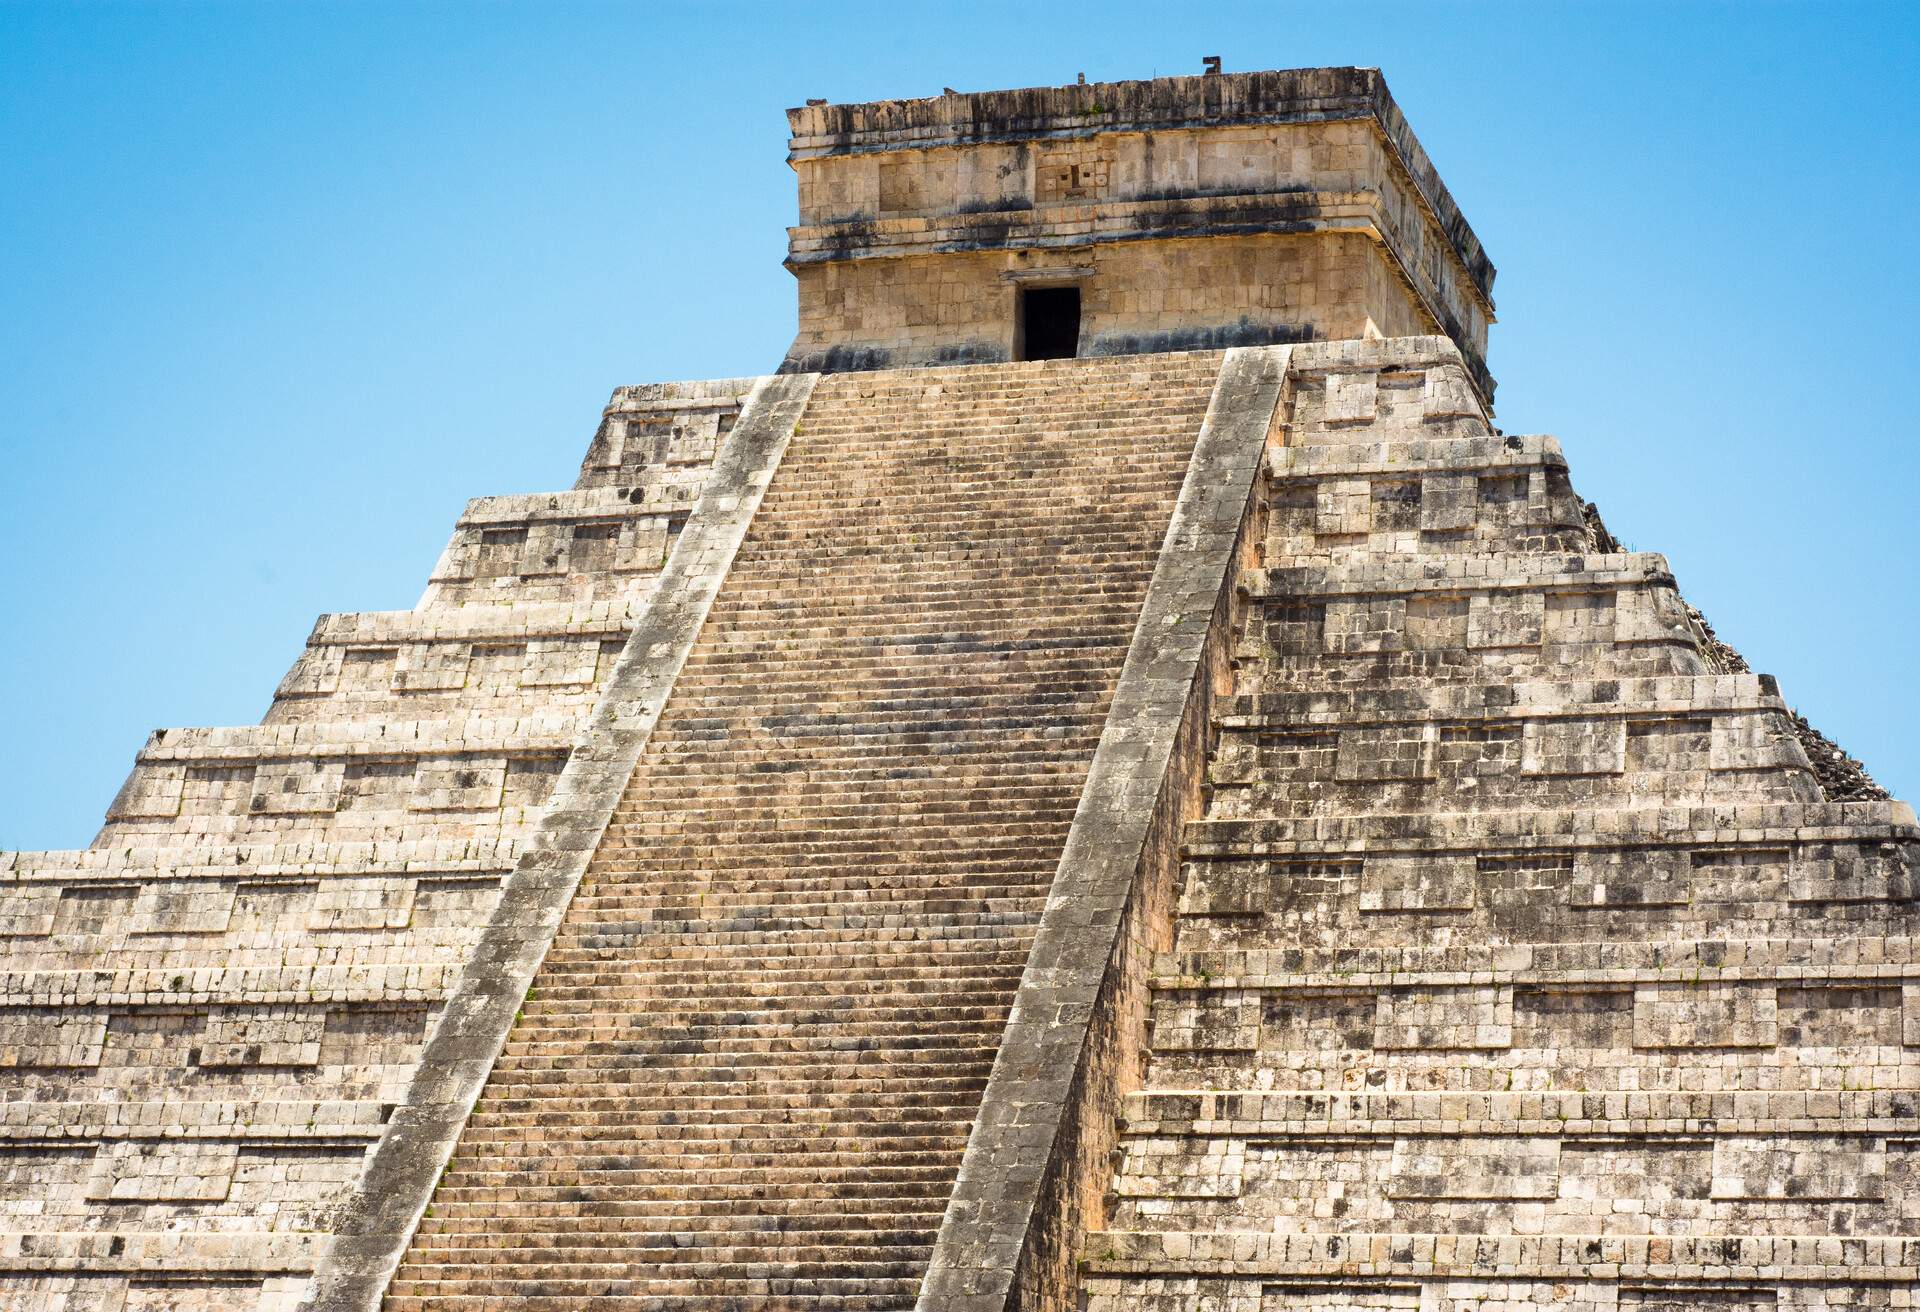 Mexico, Yucatan state, Chichen Itza archeological site, World heritage of UNESCO, Pyramid, ancient mayan ruins